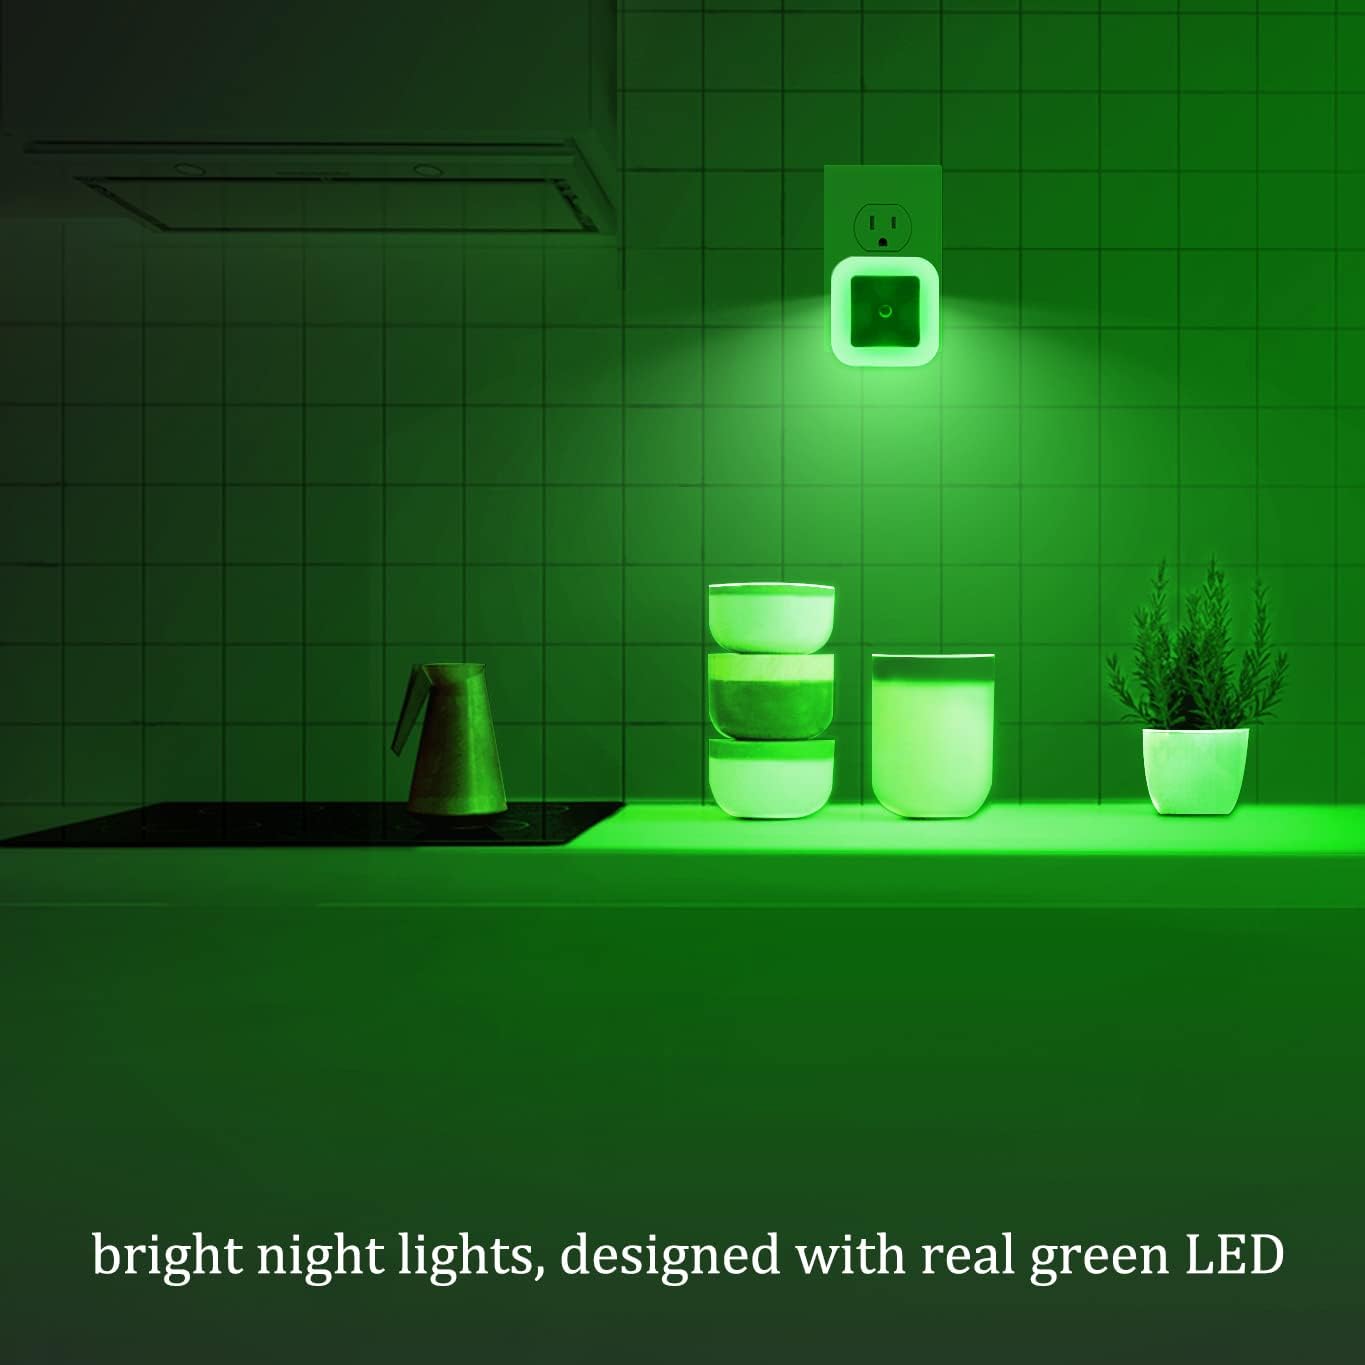 [Pack of 2] Bright Green Night Lights, Plug Into LED Wall Lights with Light Sensor, Auto ON/Off- Suitable for Bathroom, Hallway and Kitchen